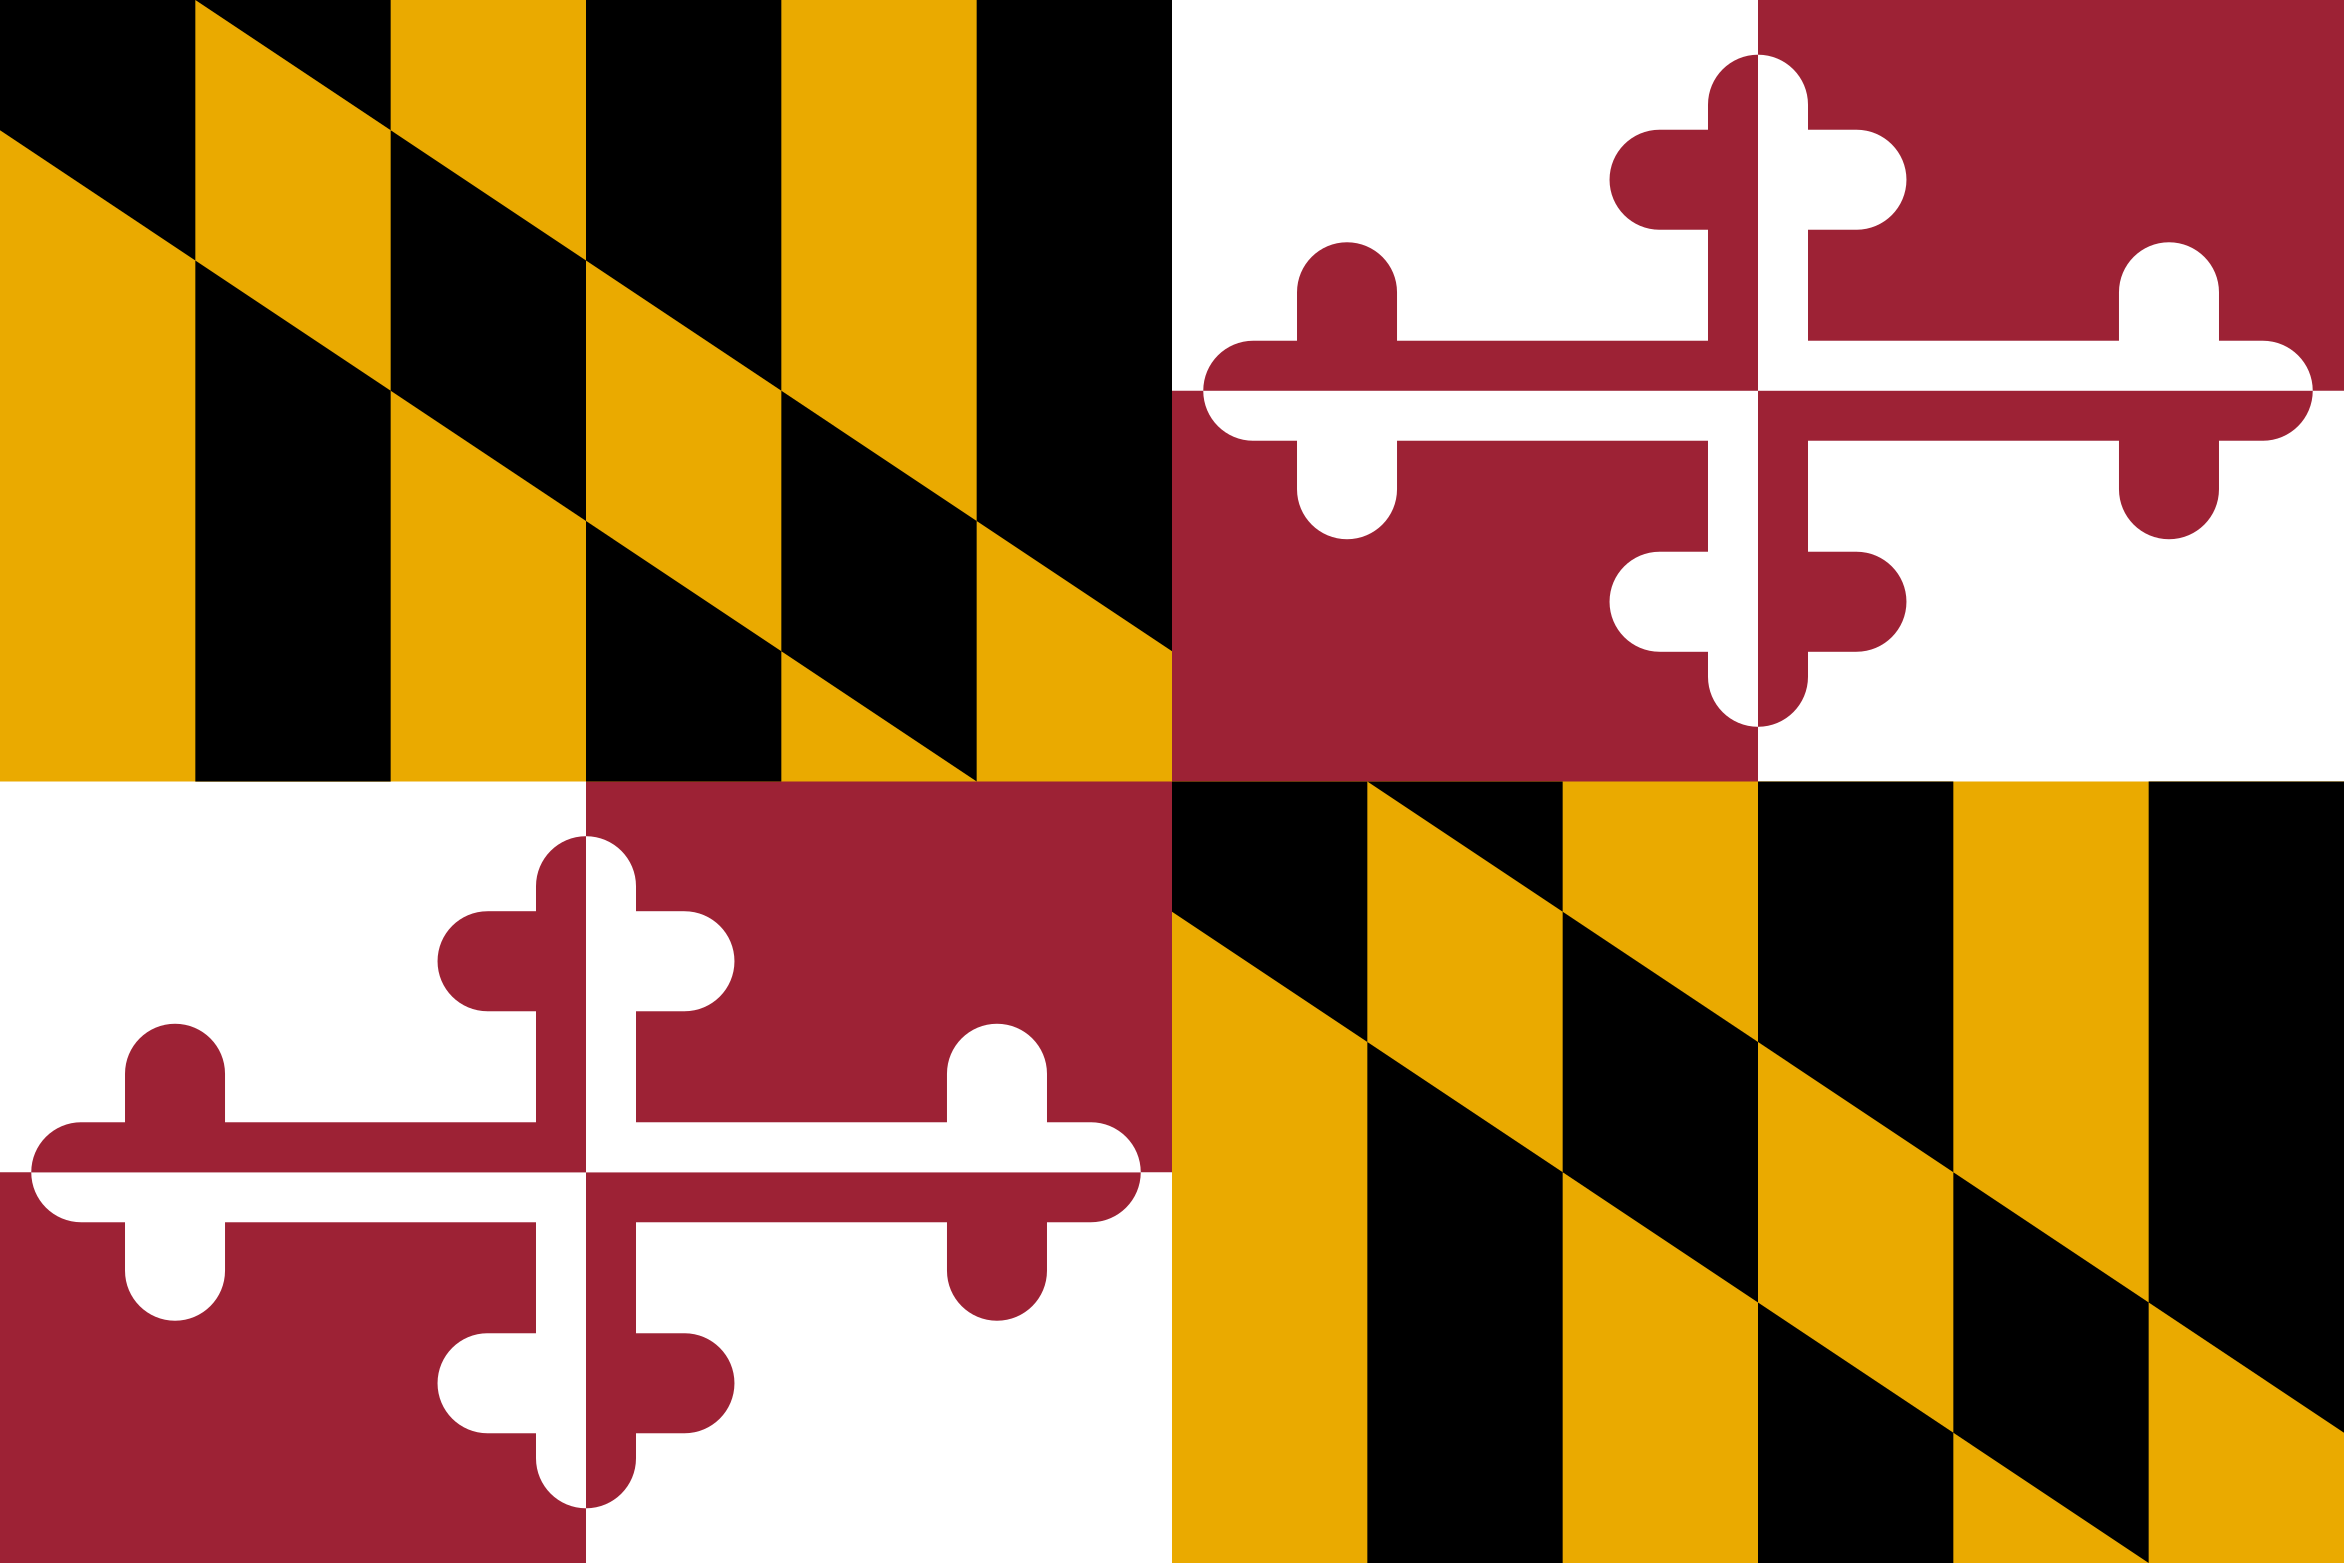 Free Maryland Flag Images: AI, EPS, GIF, JPG, PDF, PNG, SVG and more!